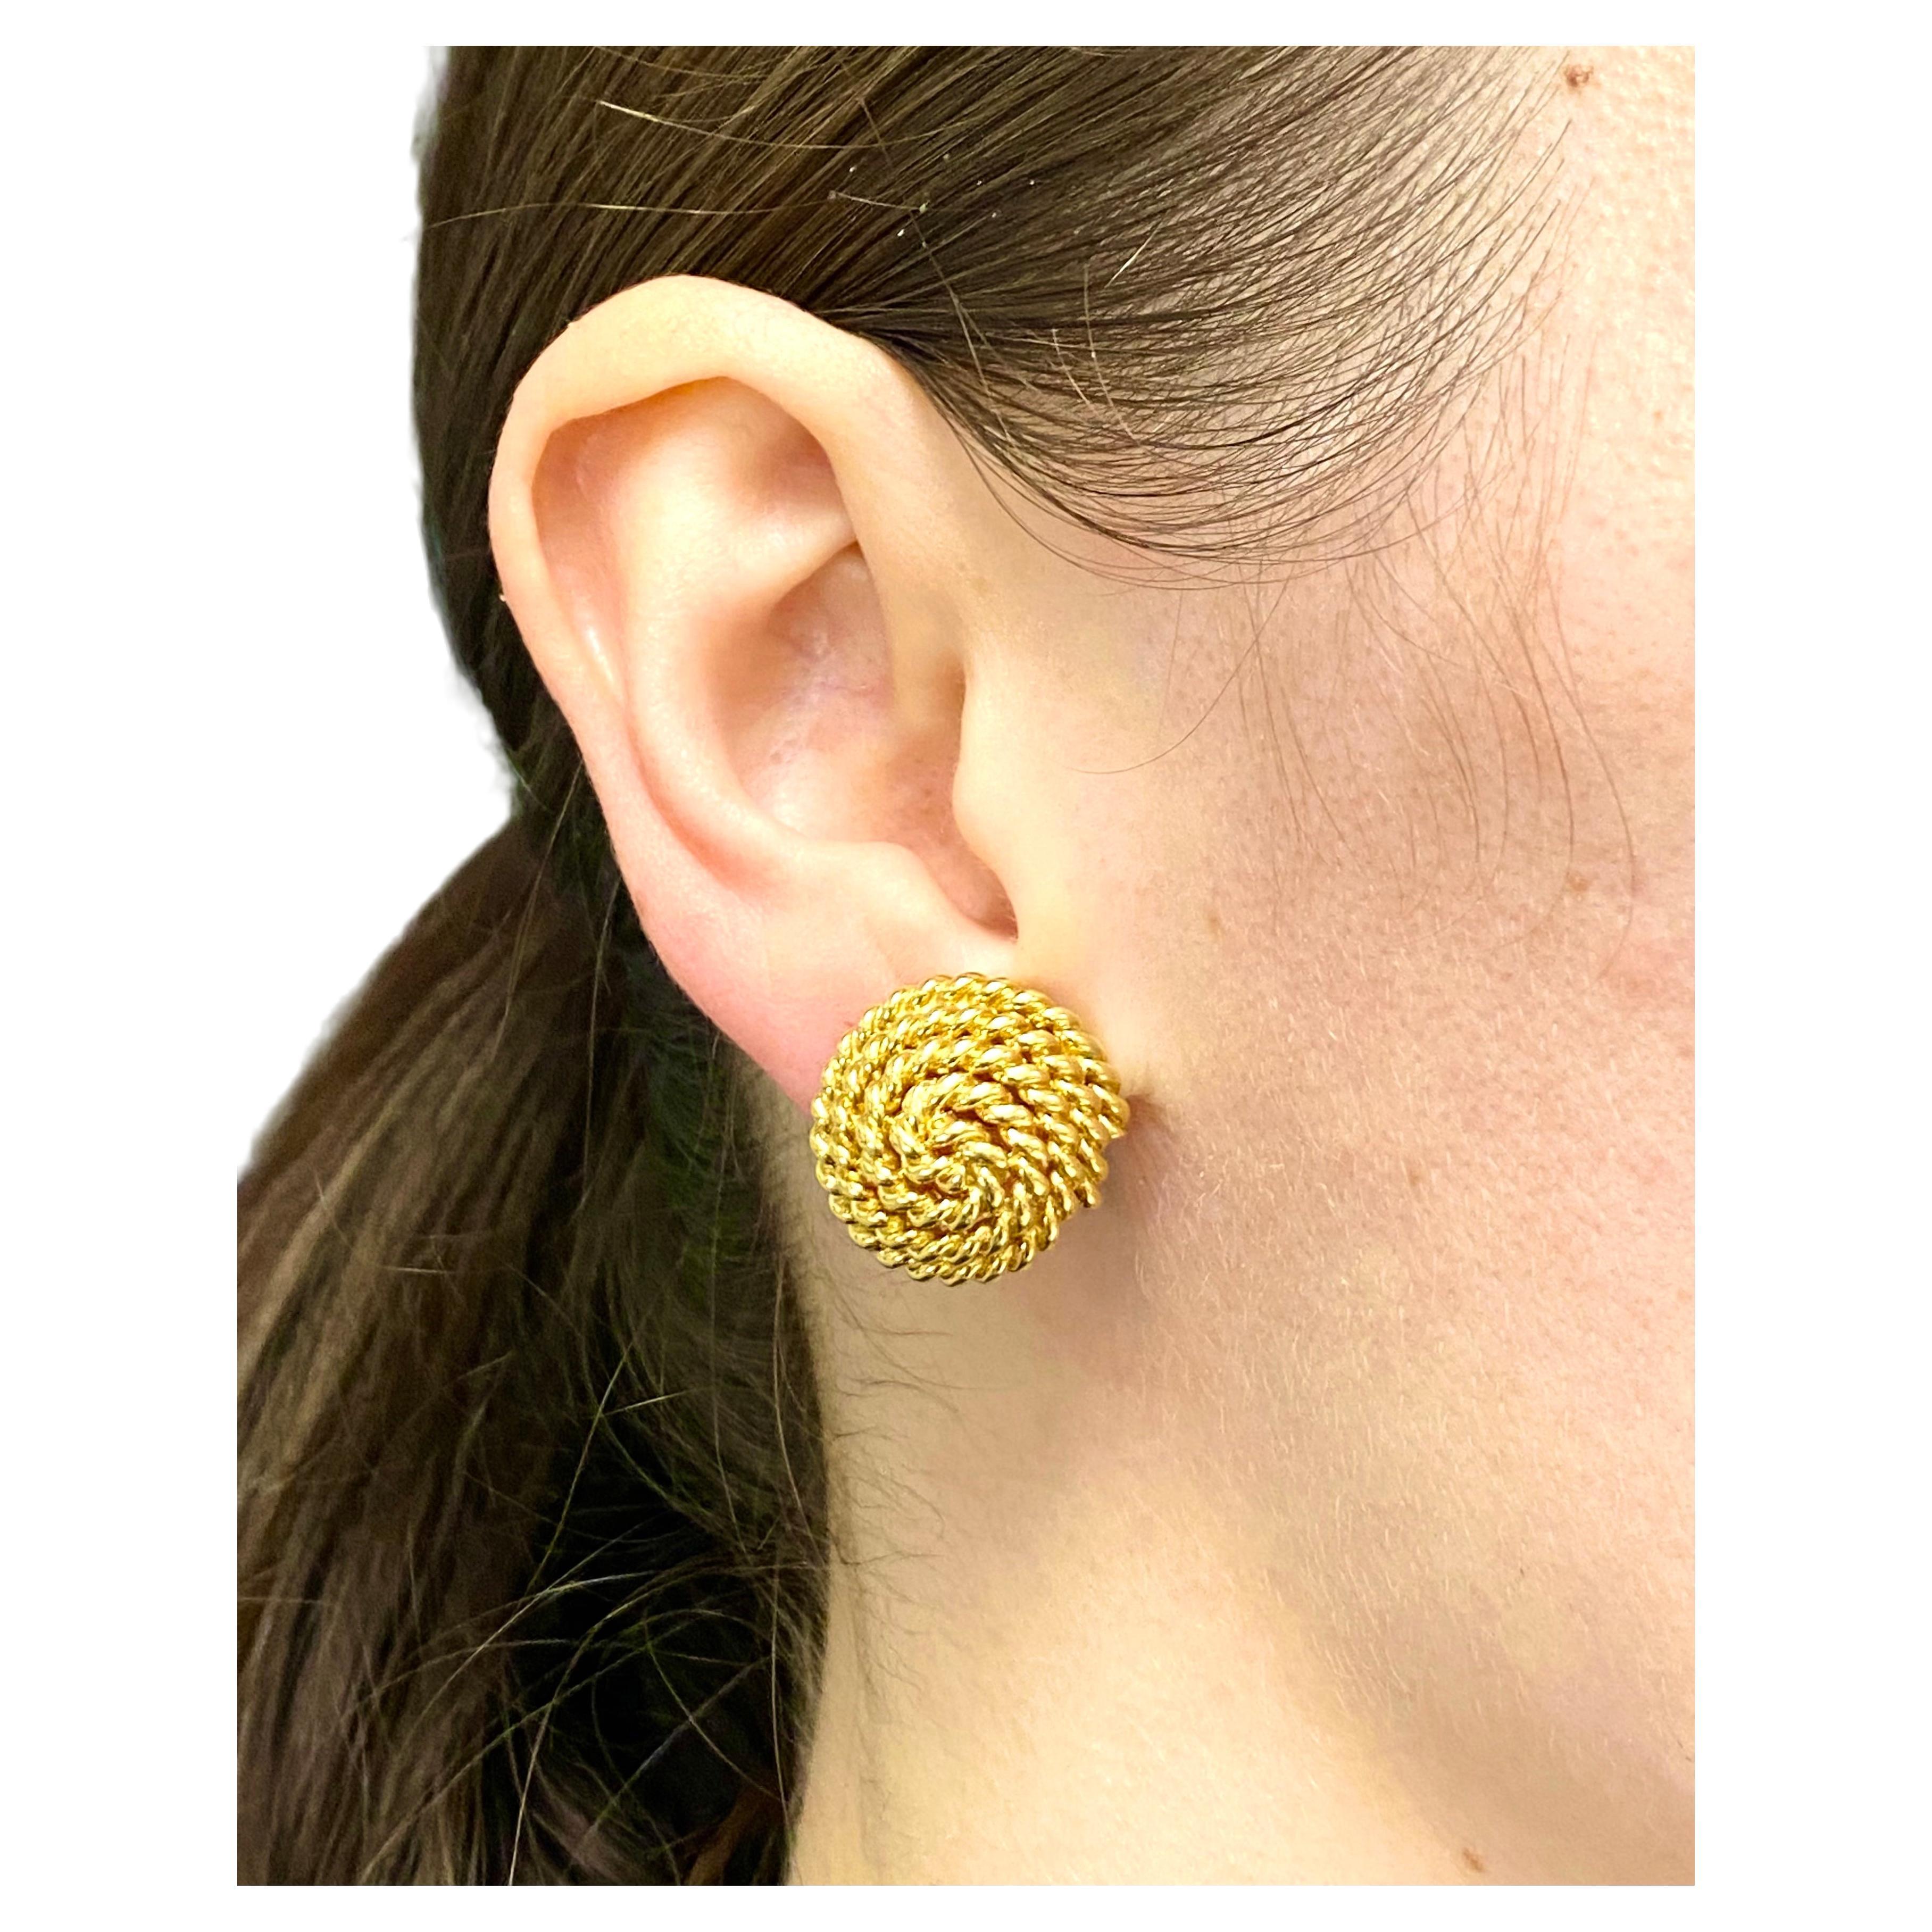 A pair of rope earrings by Tiffany & Co. made in 18k gold. The earrings have a convex shape,
with a gold rope being staged as a swirl. The gold is polished and braided which makes the
earrings look shiny and glossy. The round shape is a reference to